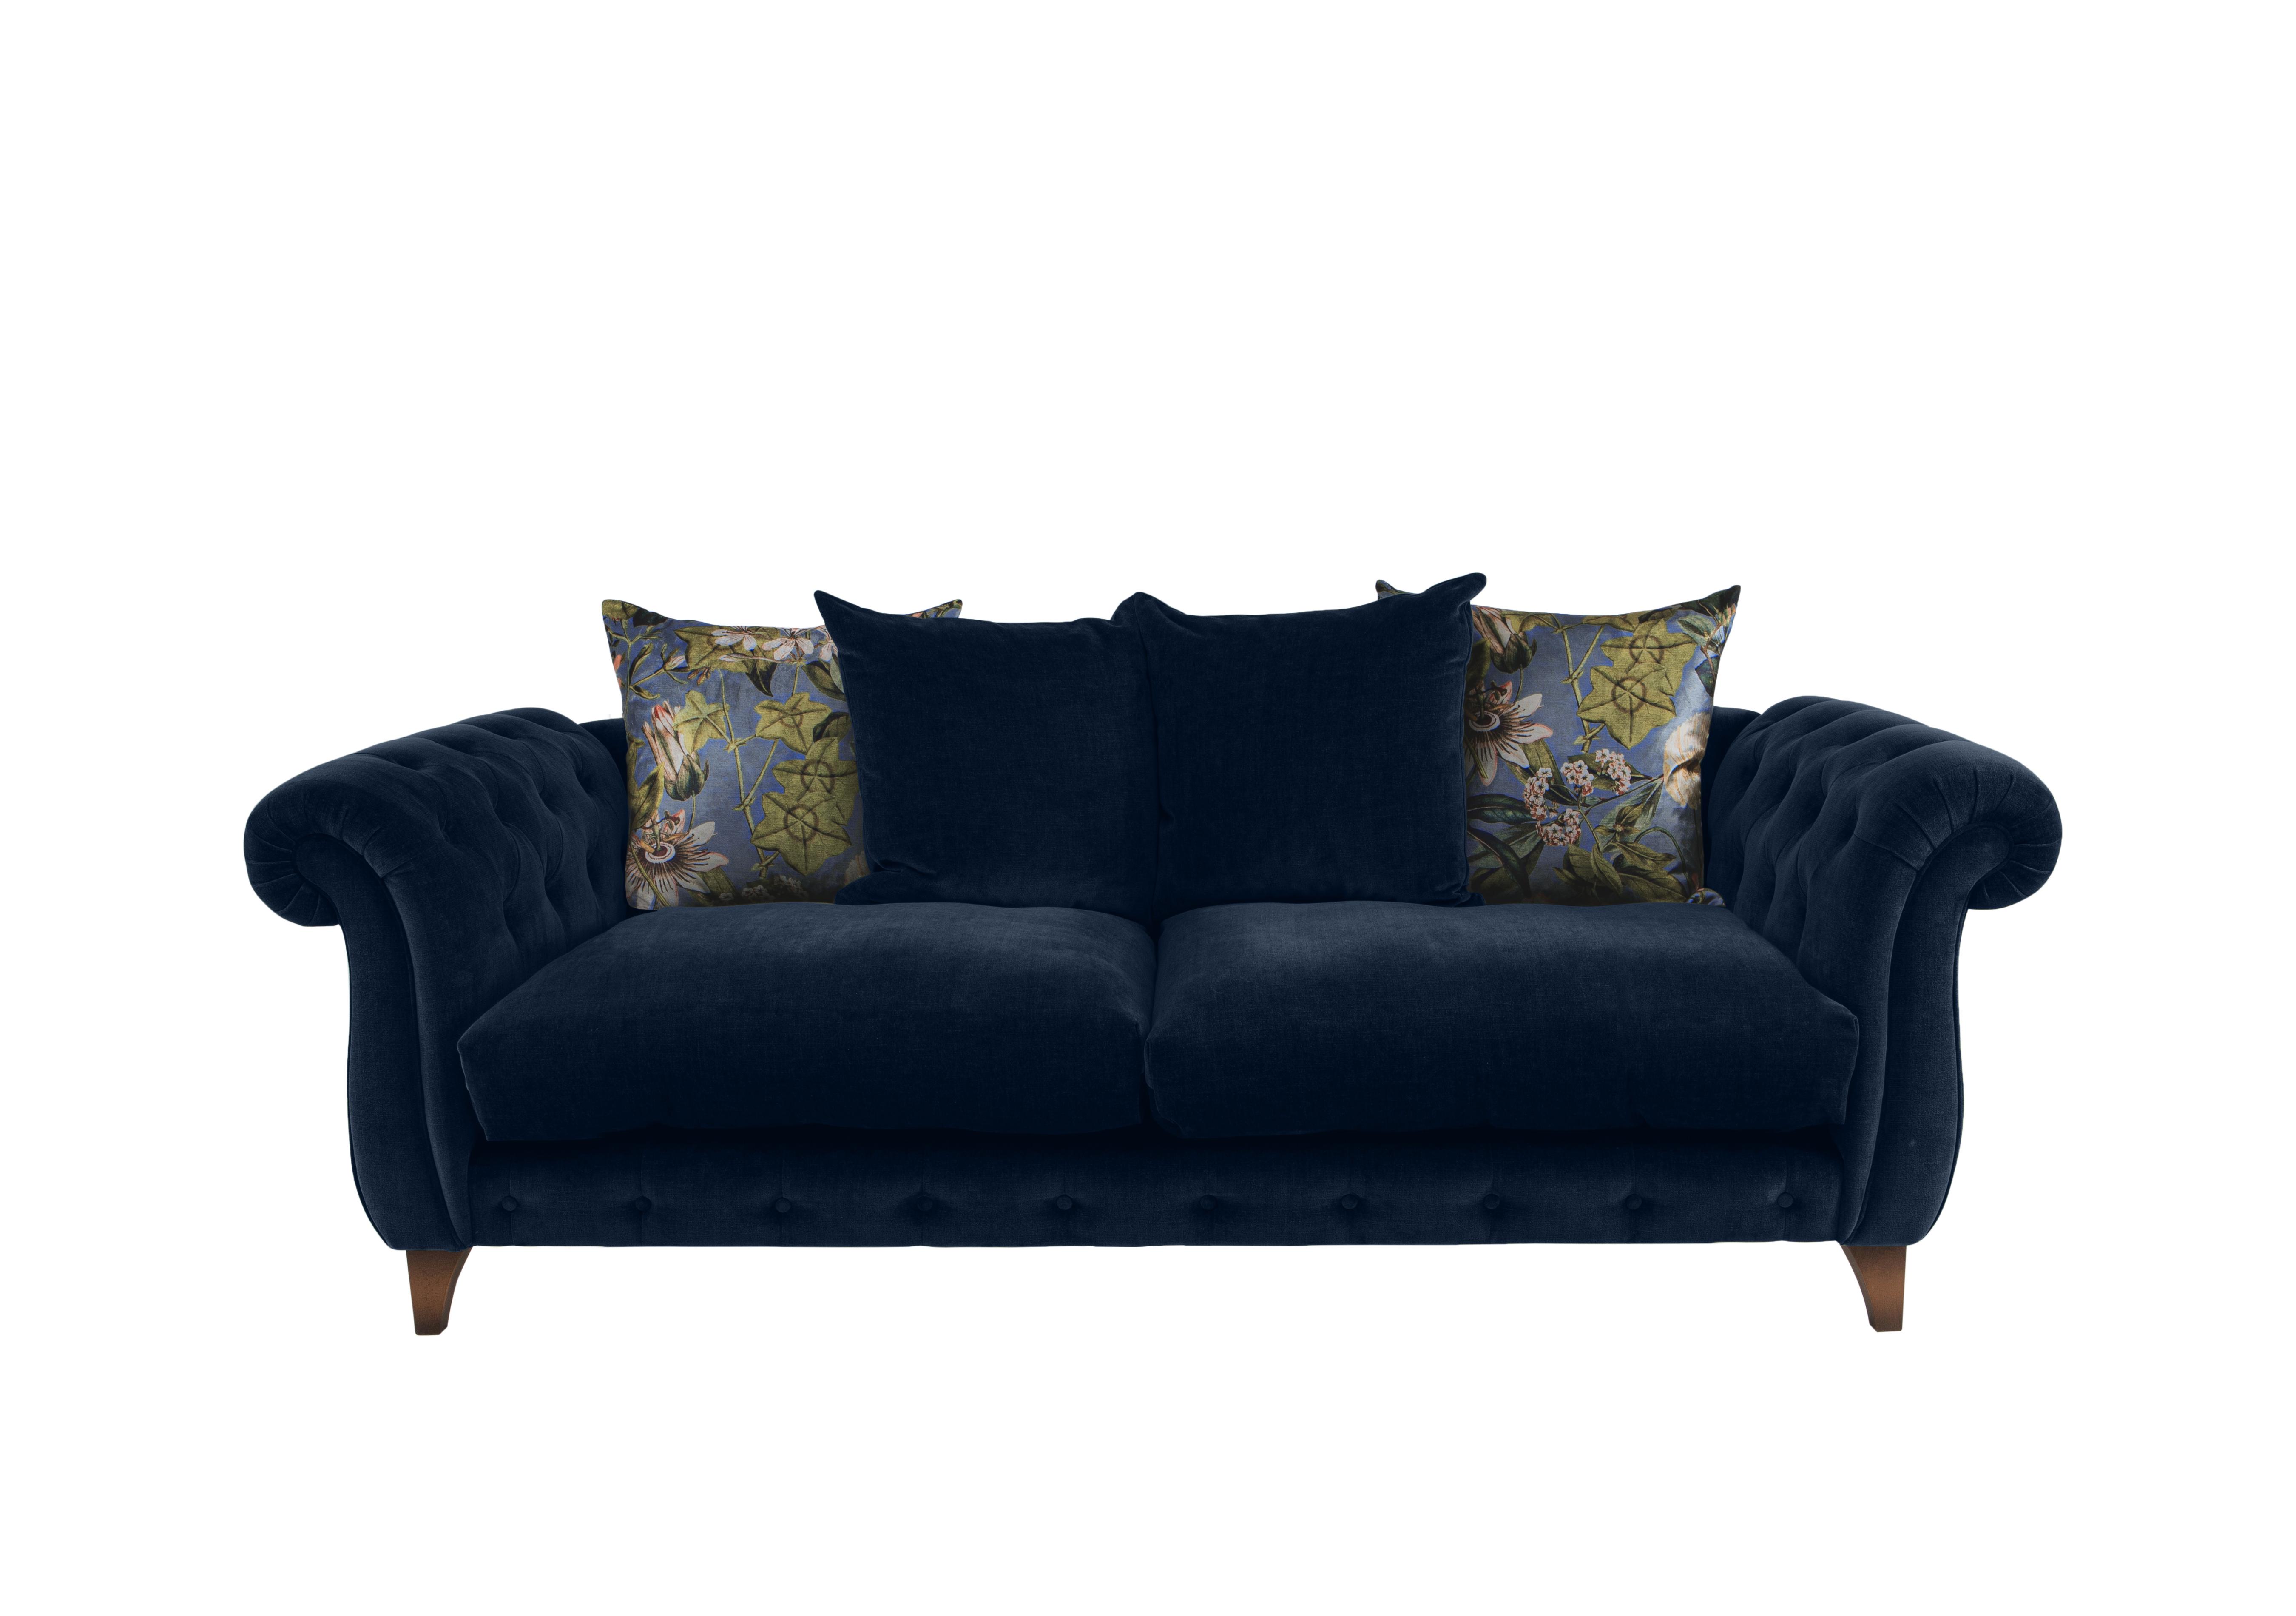 Boutique Palace Fabric 2 Seater Scatter Back Sofa in Oasis Navy on Furniture Village